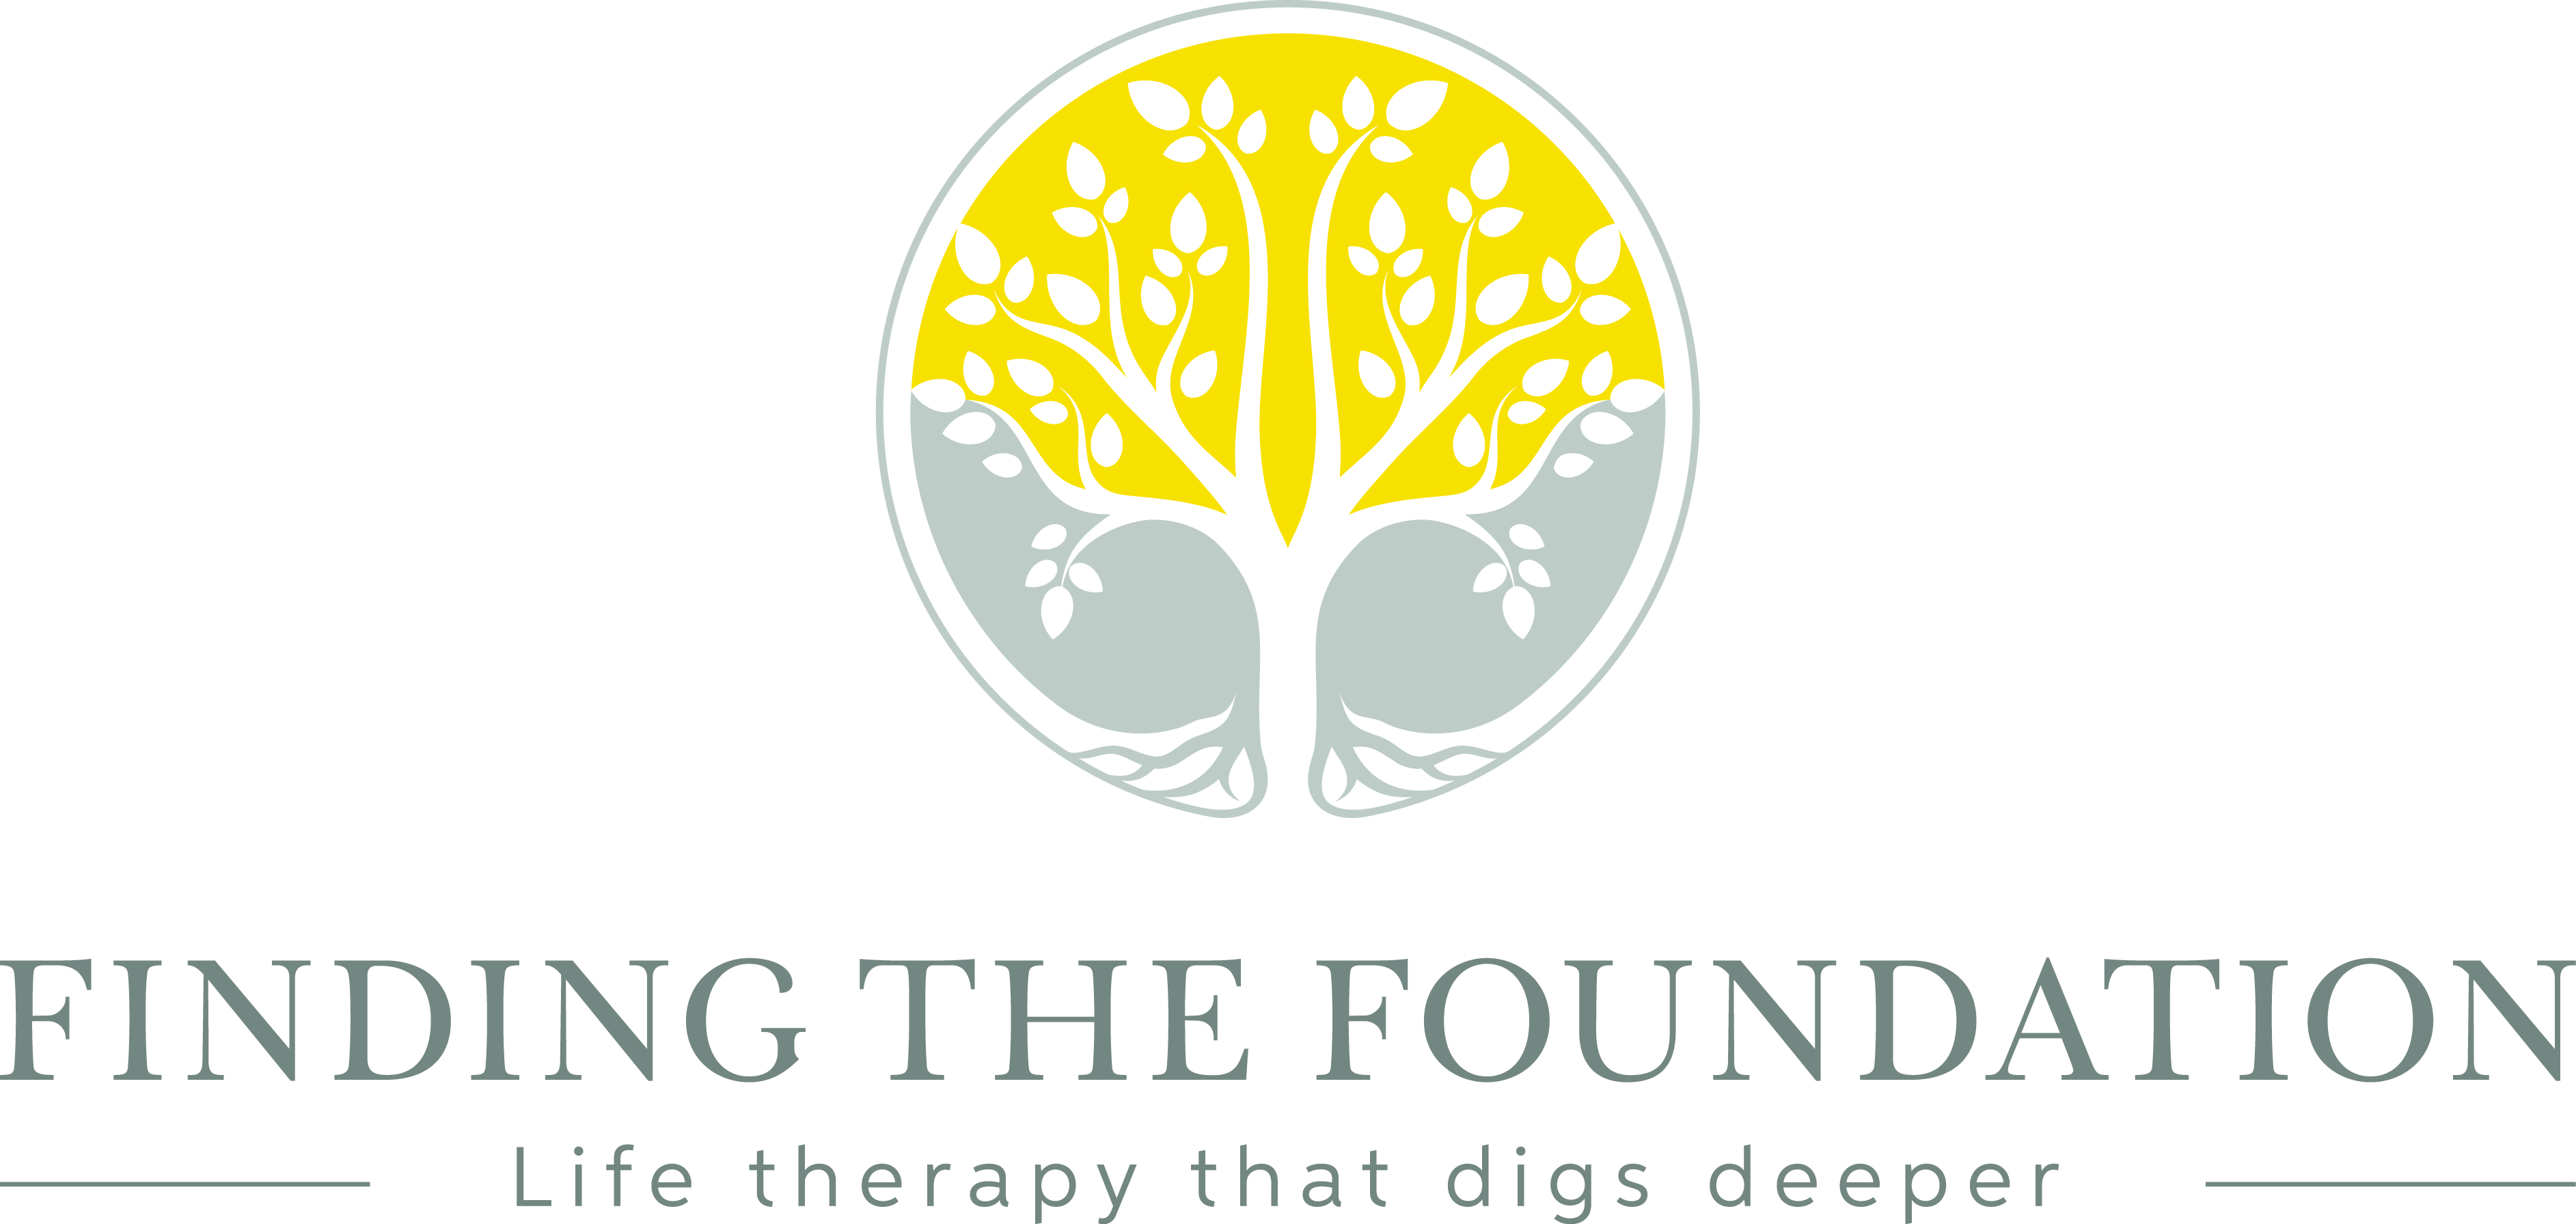 Finding the Foundation - Life Therapy That Digs Deeper